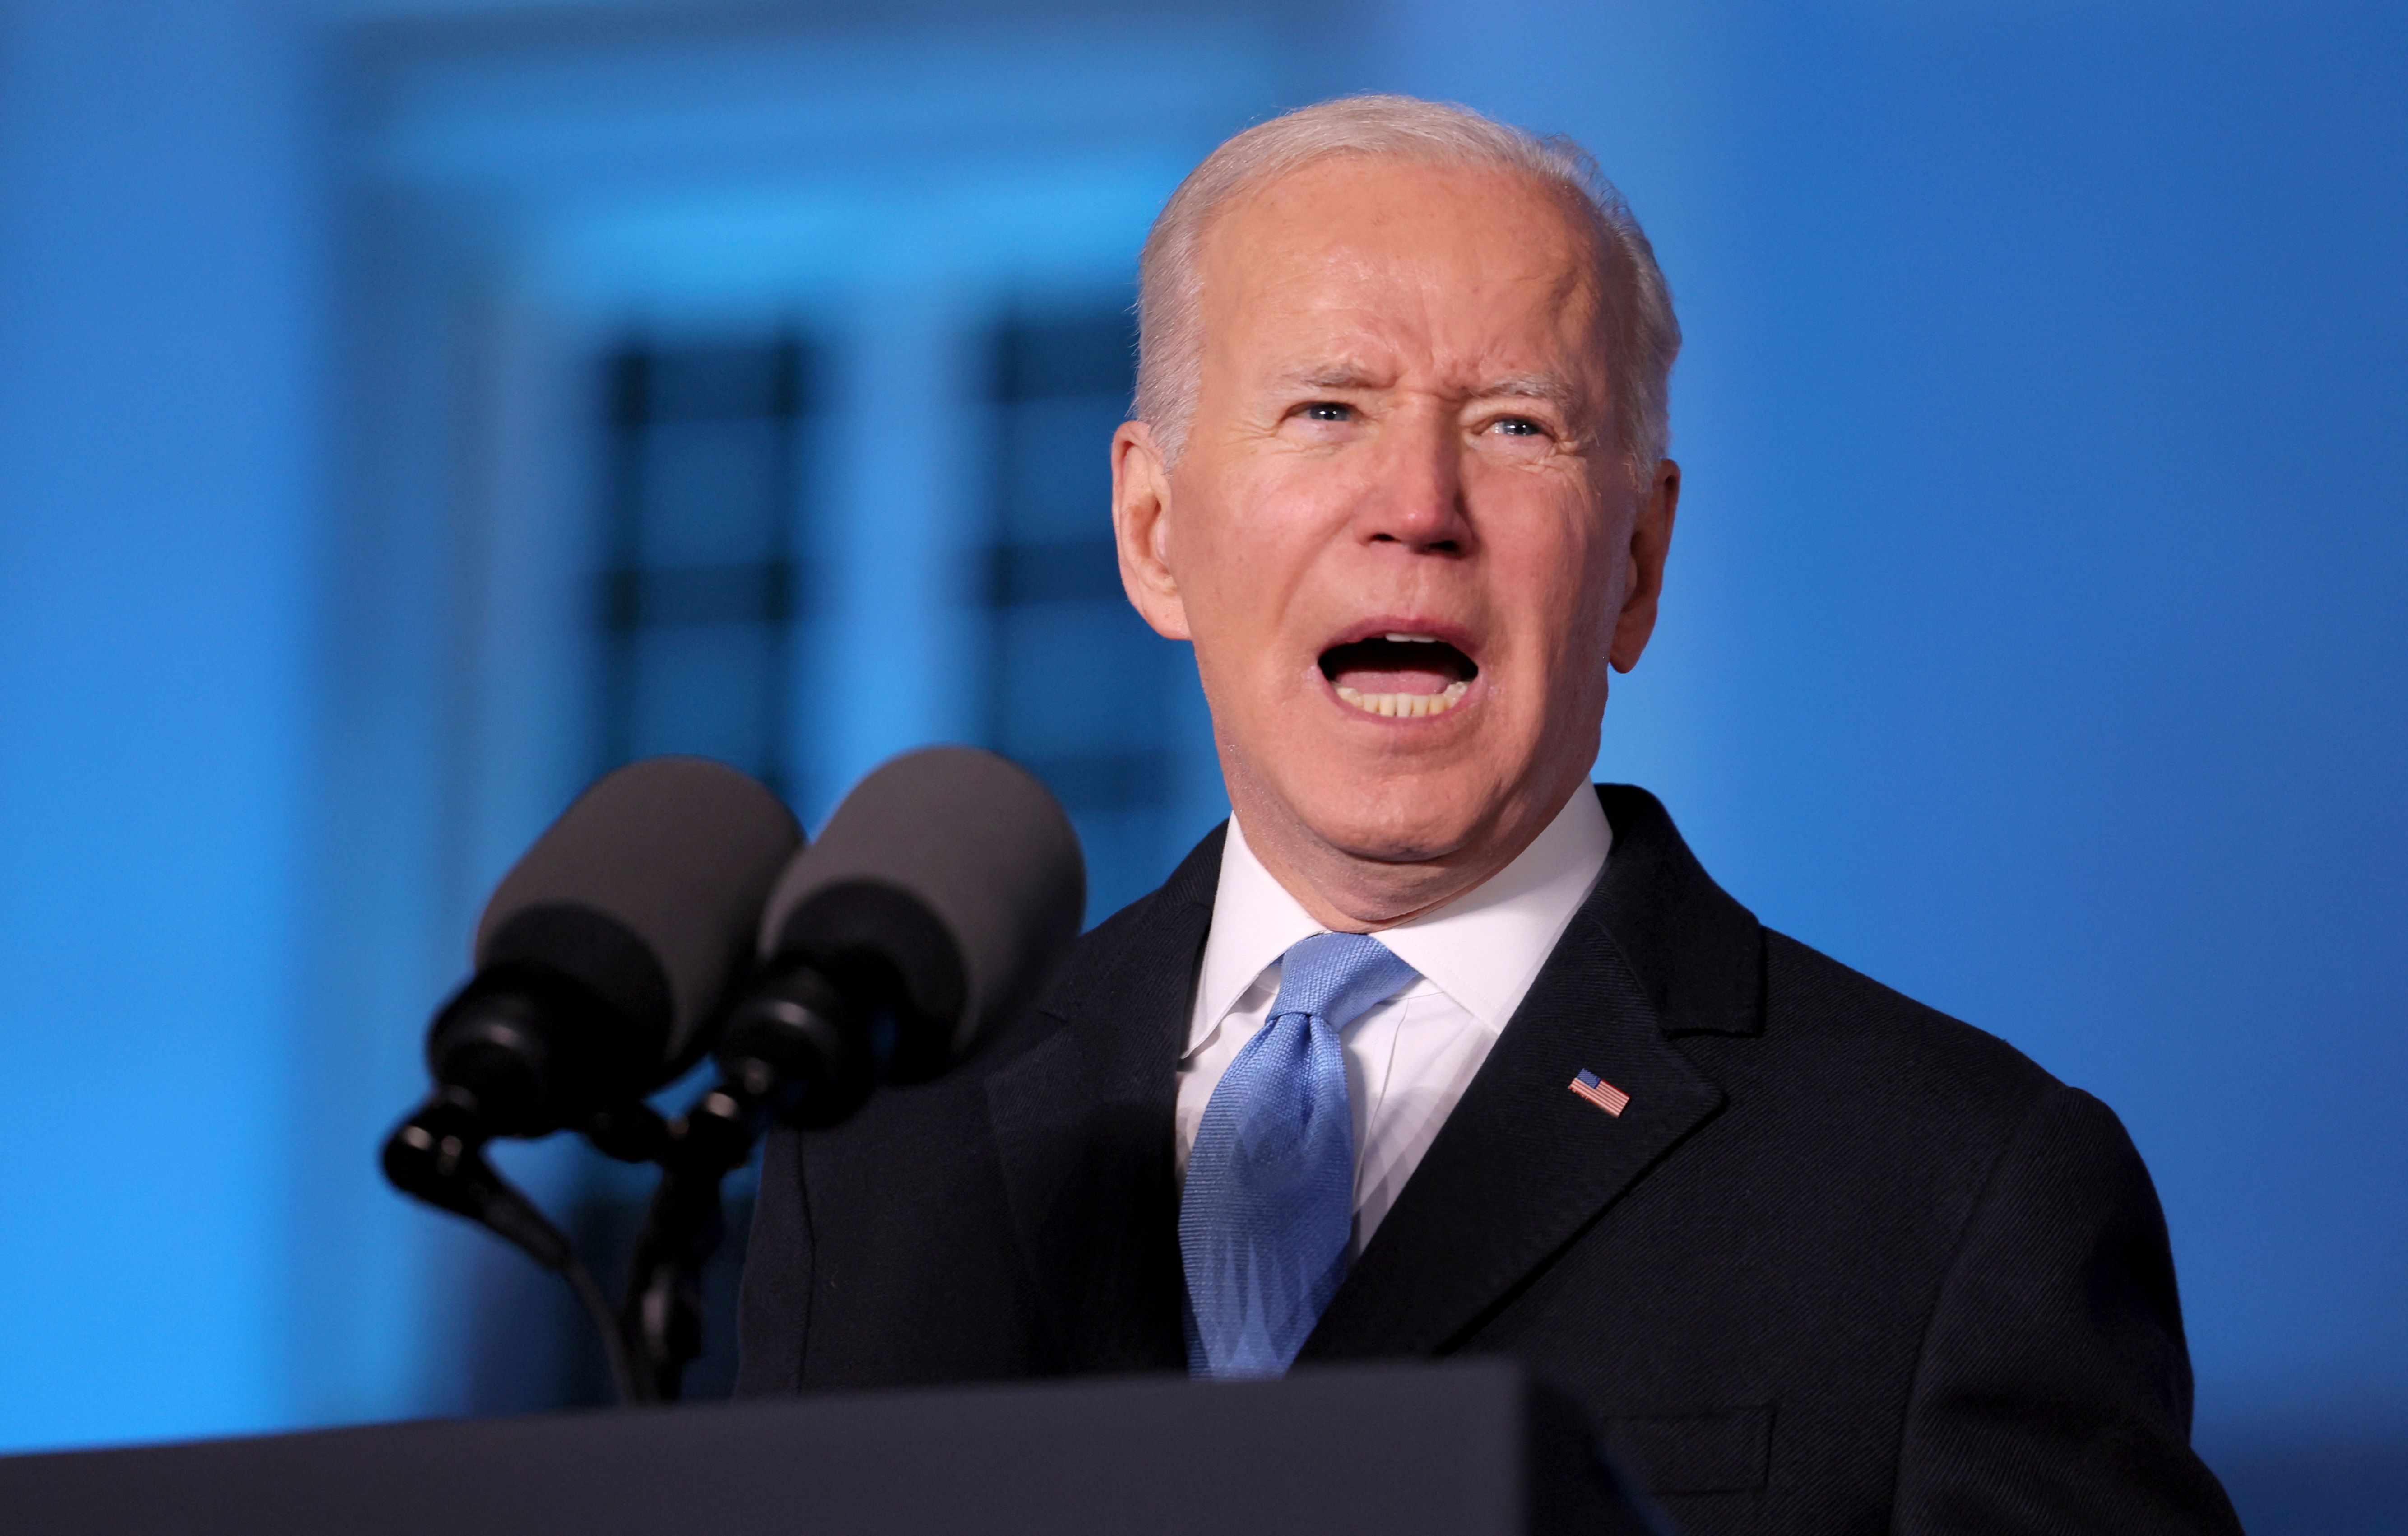 Joe Biden Decided to Change The Unit System From Yard-Pound to SI Unit